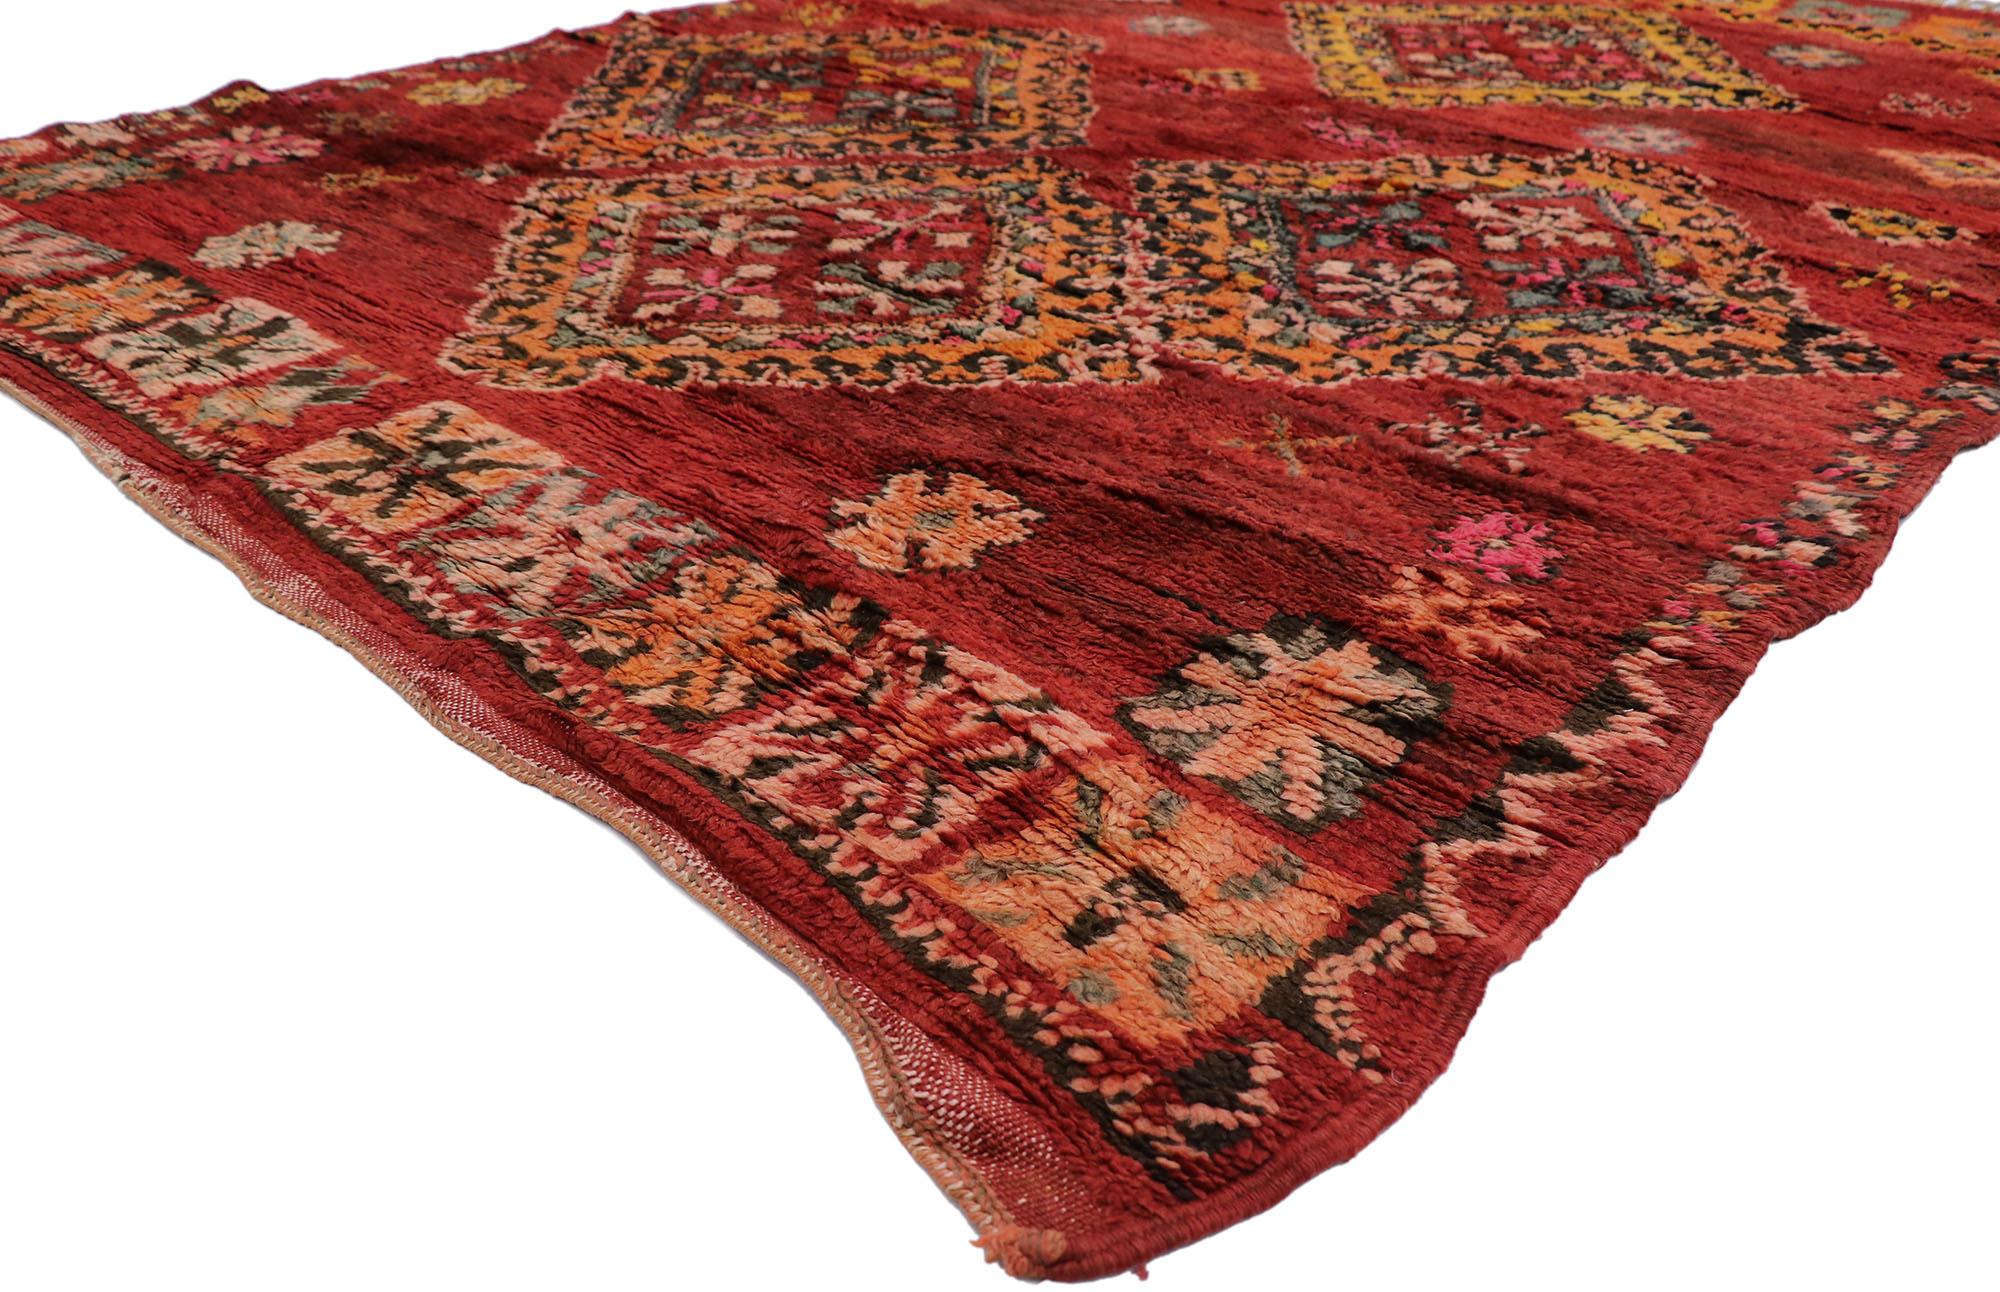 21529 Vintage Red Boujad Moroccan Rug, 06'03 x 09'06.
Boho Jungalow meets nomadic charm in this hand knotted wool vintage red Moroccan rug. The essoteric symbolism and bold earthy hues woven into this piece work together capturing the essence of